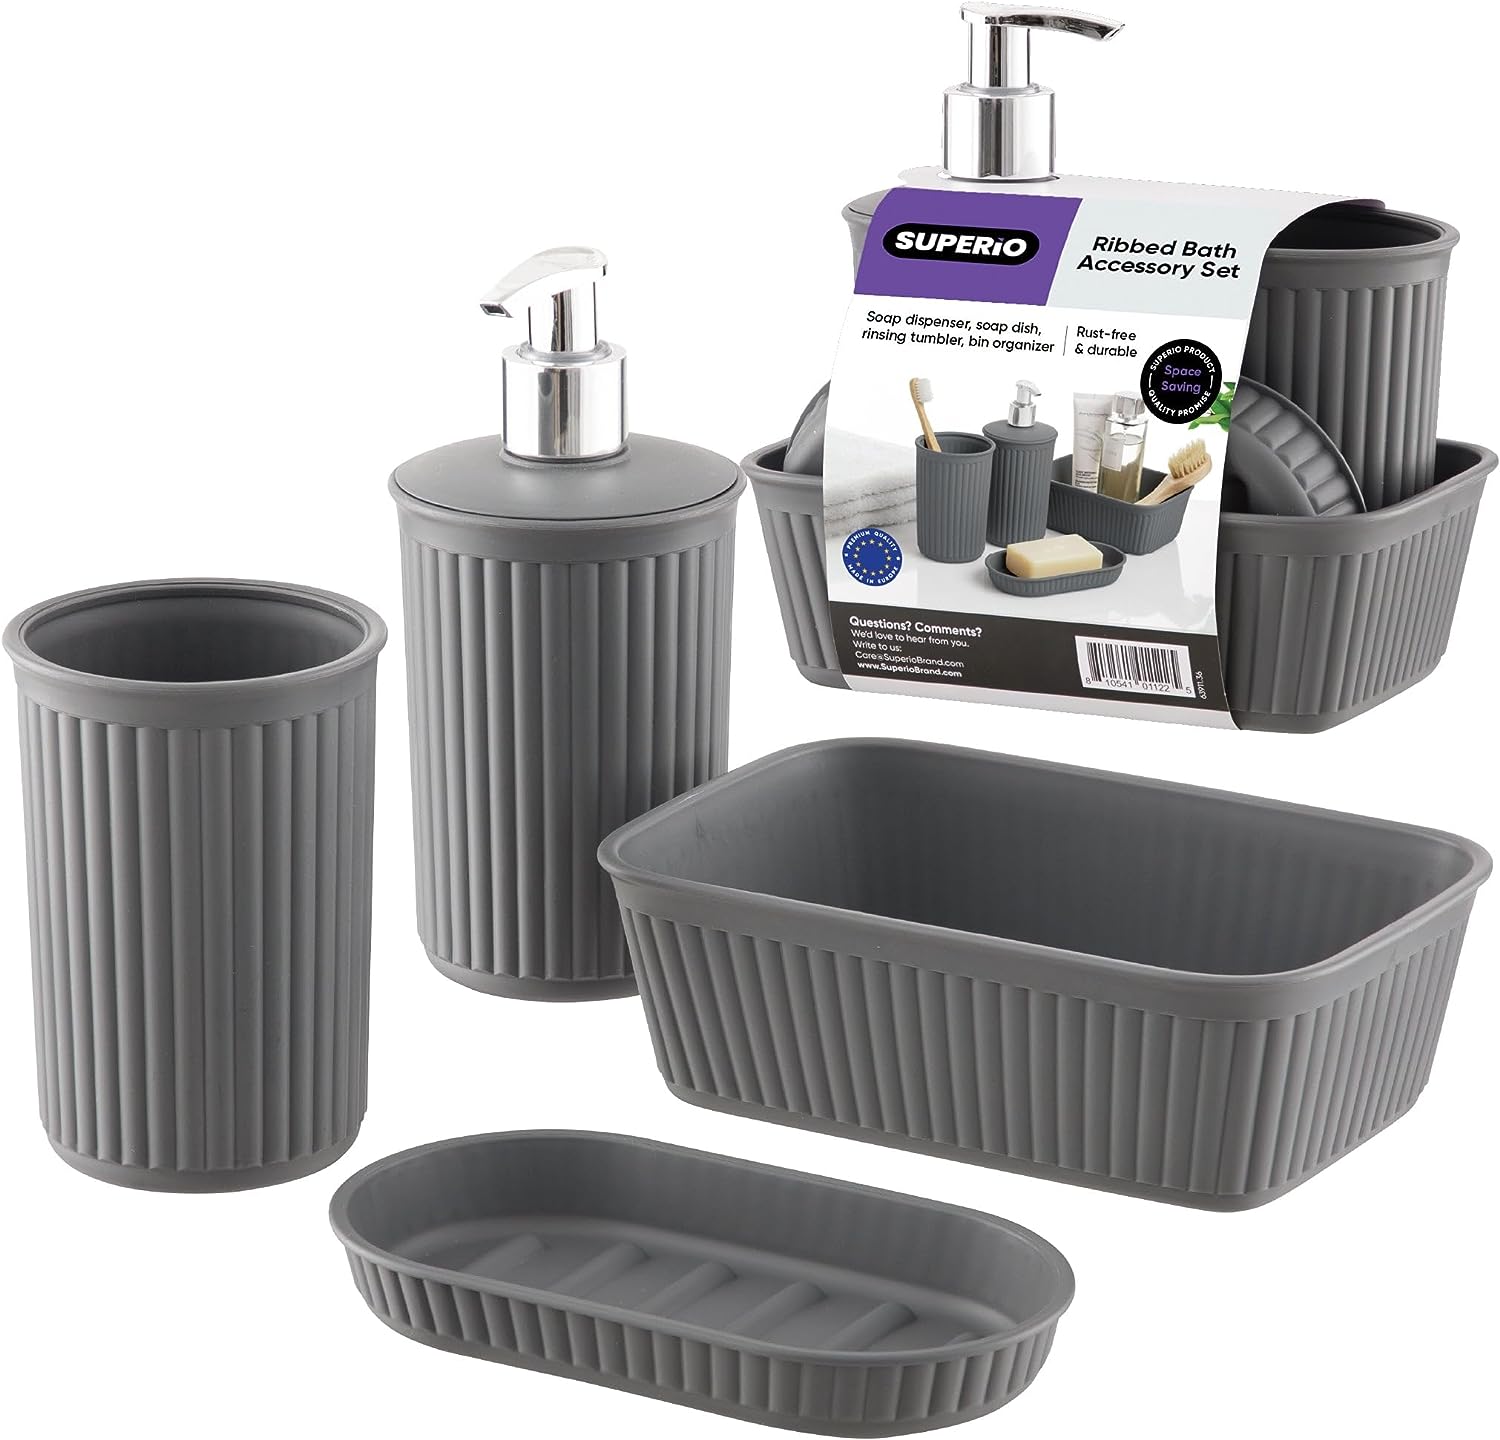 Superio Brand 4 Piece Decorative Ribbed Bathroom Accessory Set, Plastic - Color Options:  White Smoke, White, Blue, Taupe, Lilac, Brown and Grey